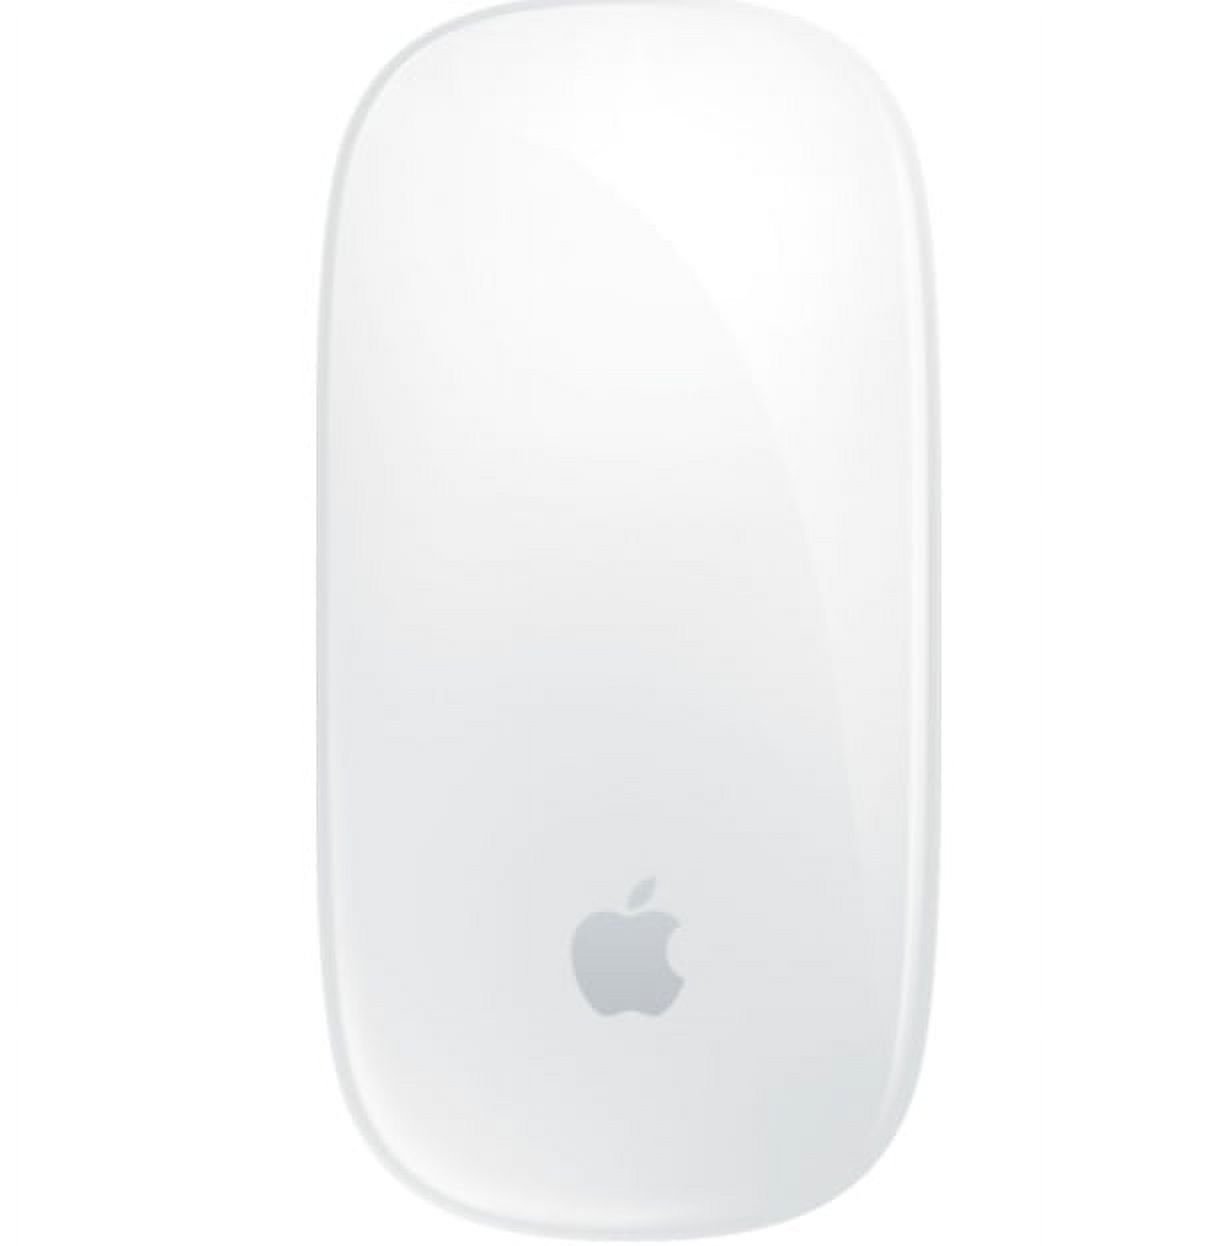 Apple Magic Mouse Wireless Bluetooth Rechargeable - image 1 of 3